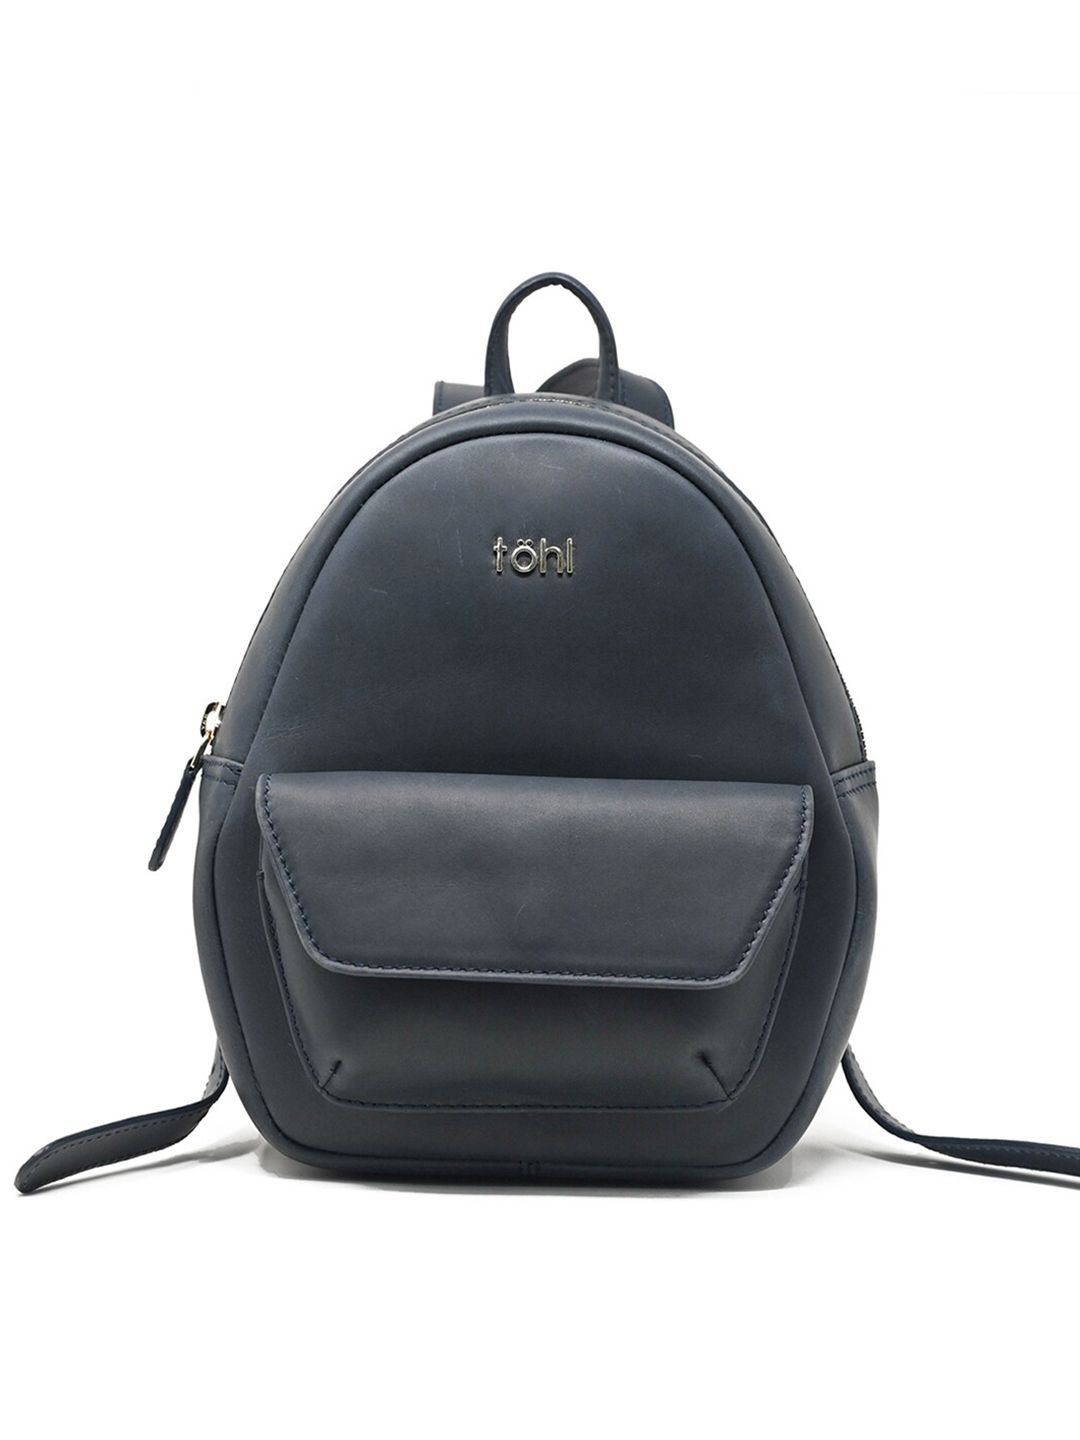 tohl Women Navy Blue Backpack Price in India